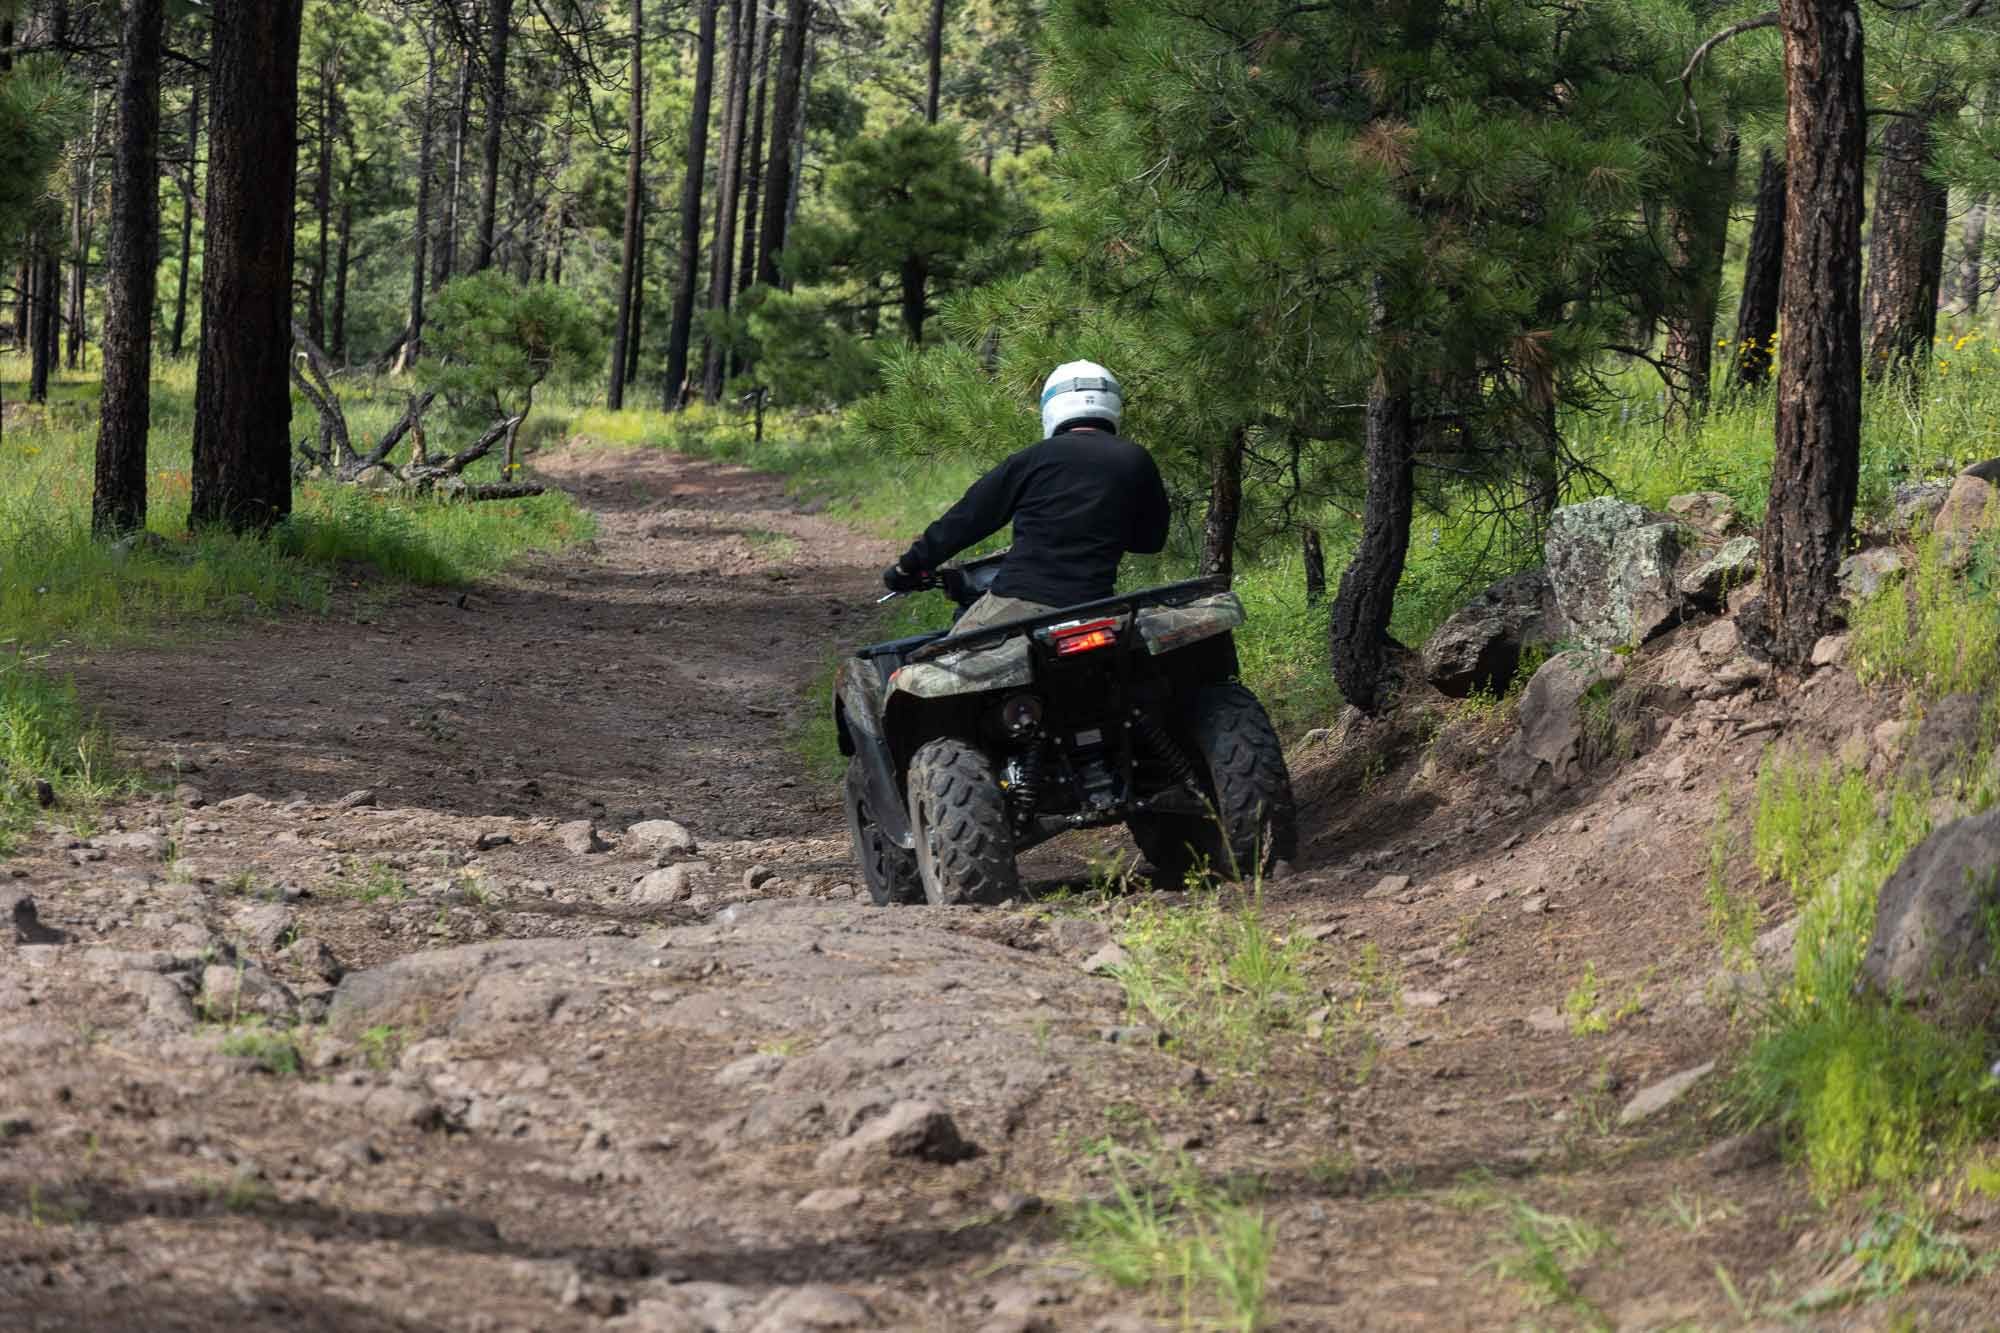 Trail maps are invaluable tools when you’re out in the sticks, and South Dakota’s Northern Hills Recreation Area has just wrapped a project to provide maps of more 3,000 miles of trail.